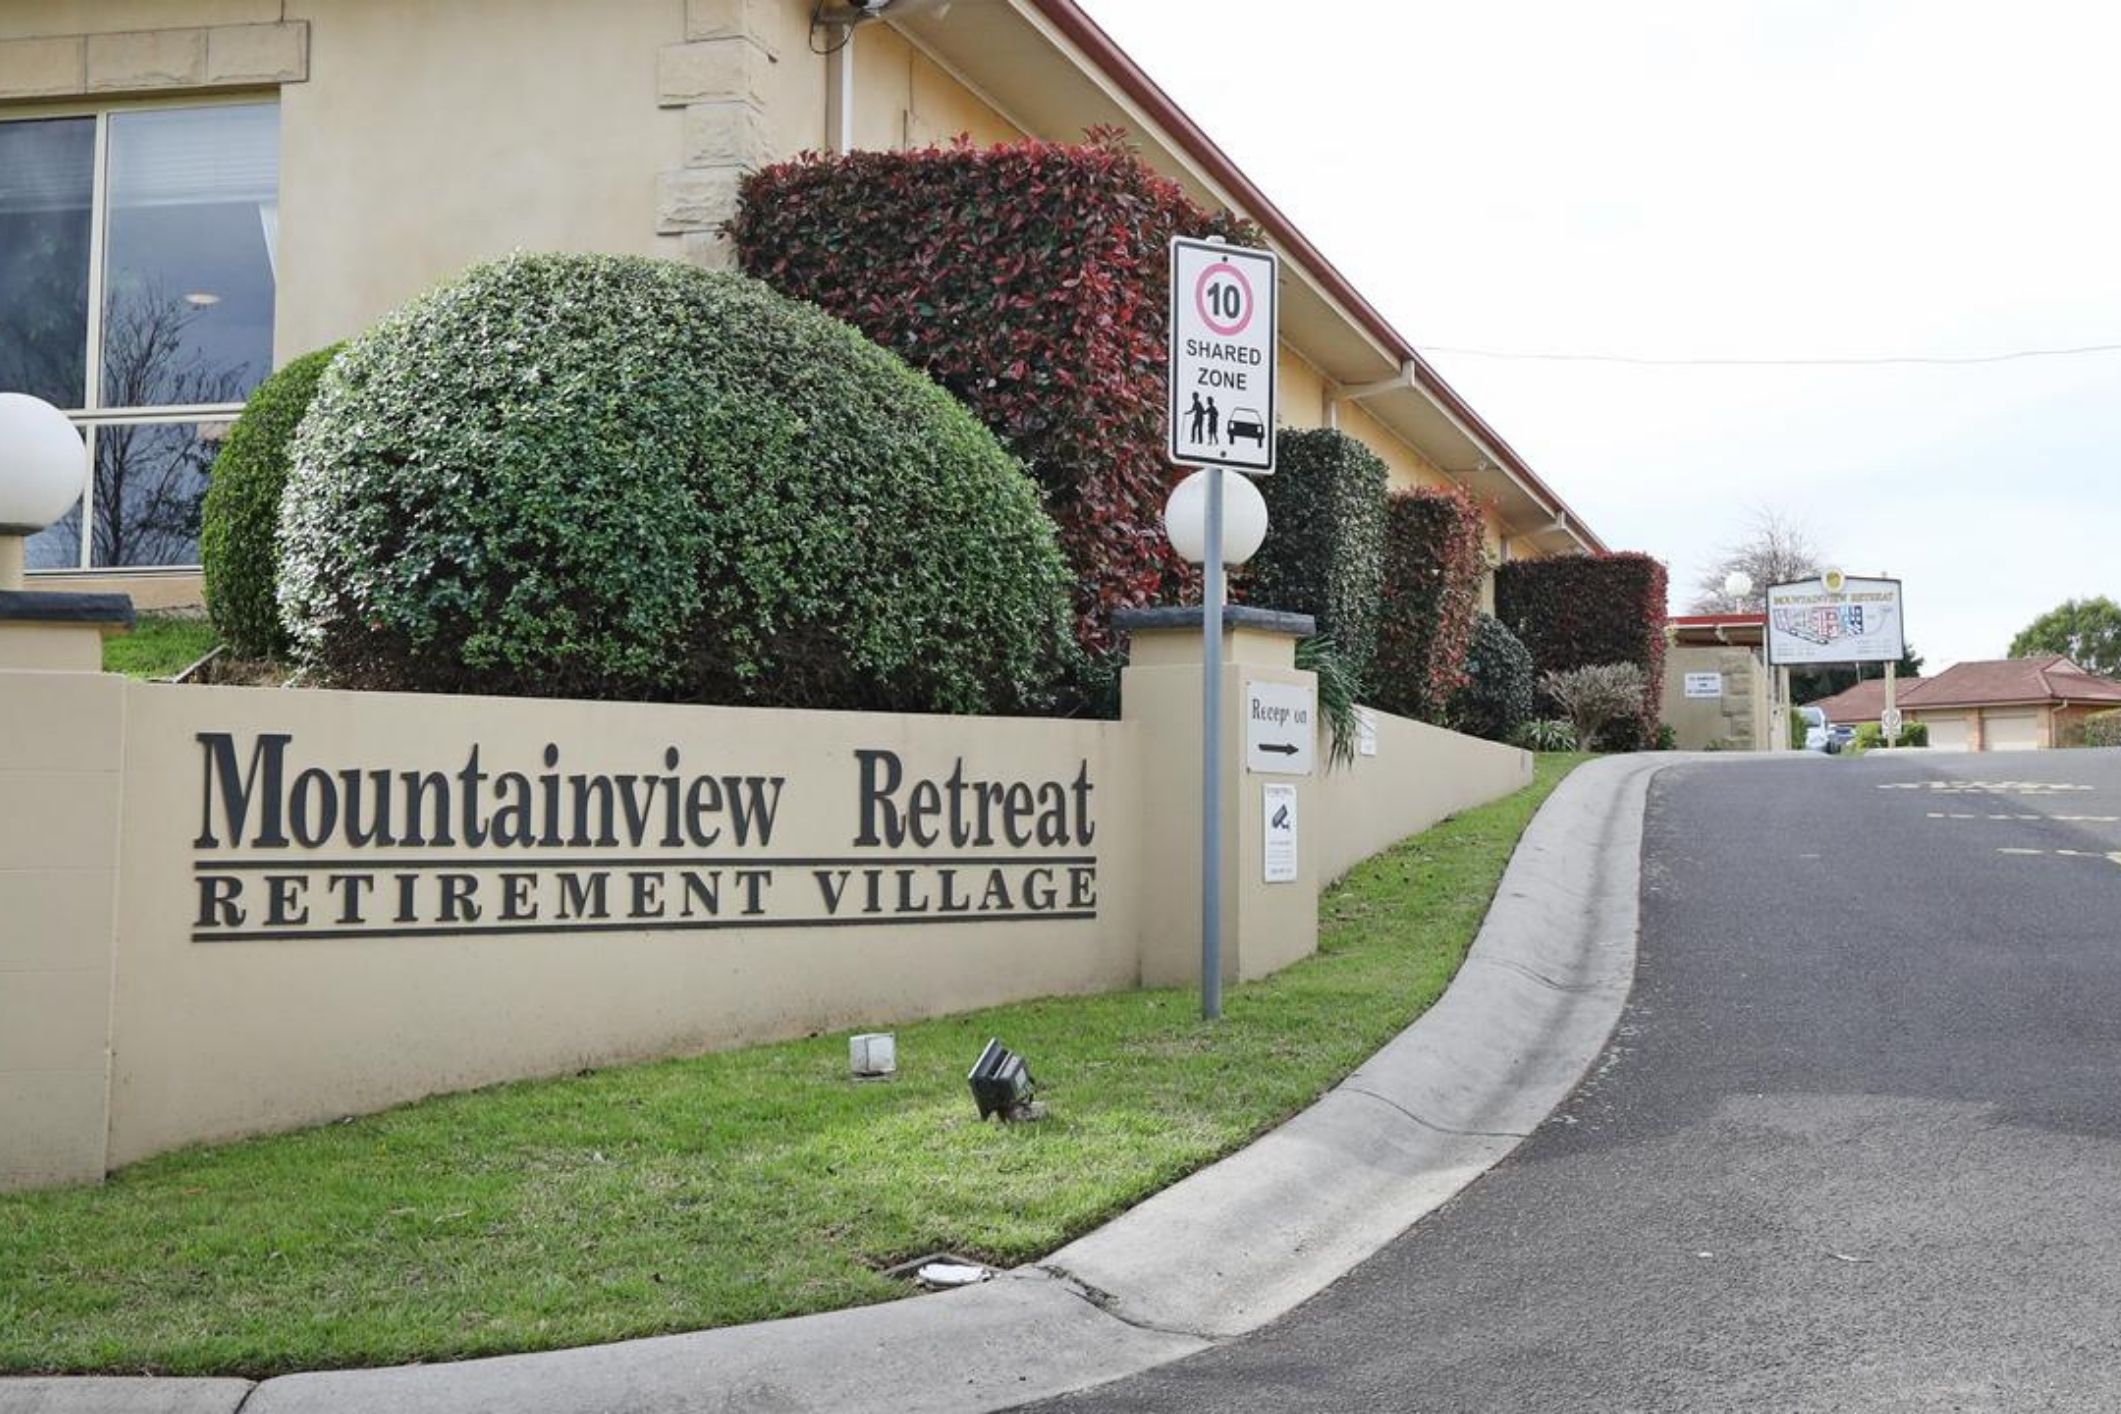 Sydney Grandfather nabbed selling drugs from his retirement village